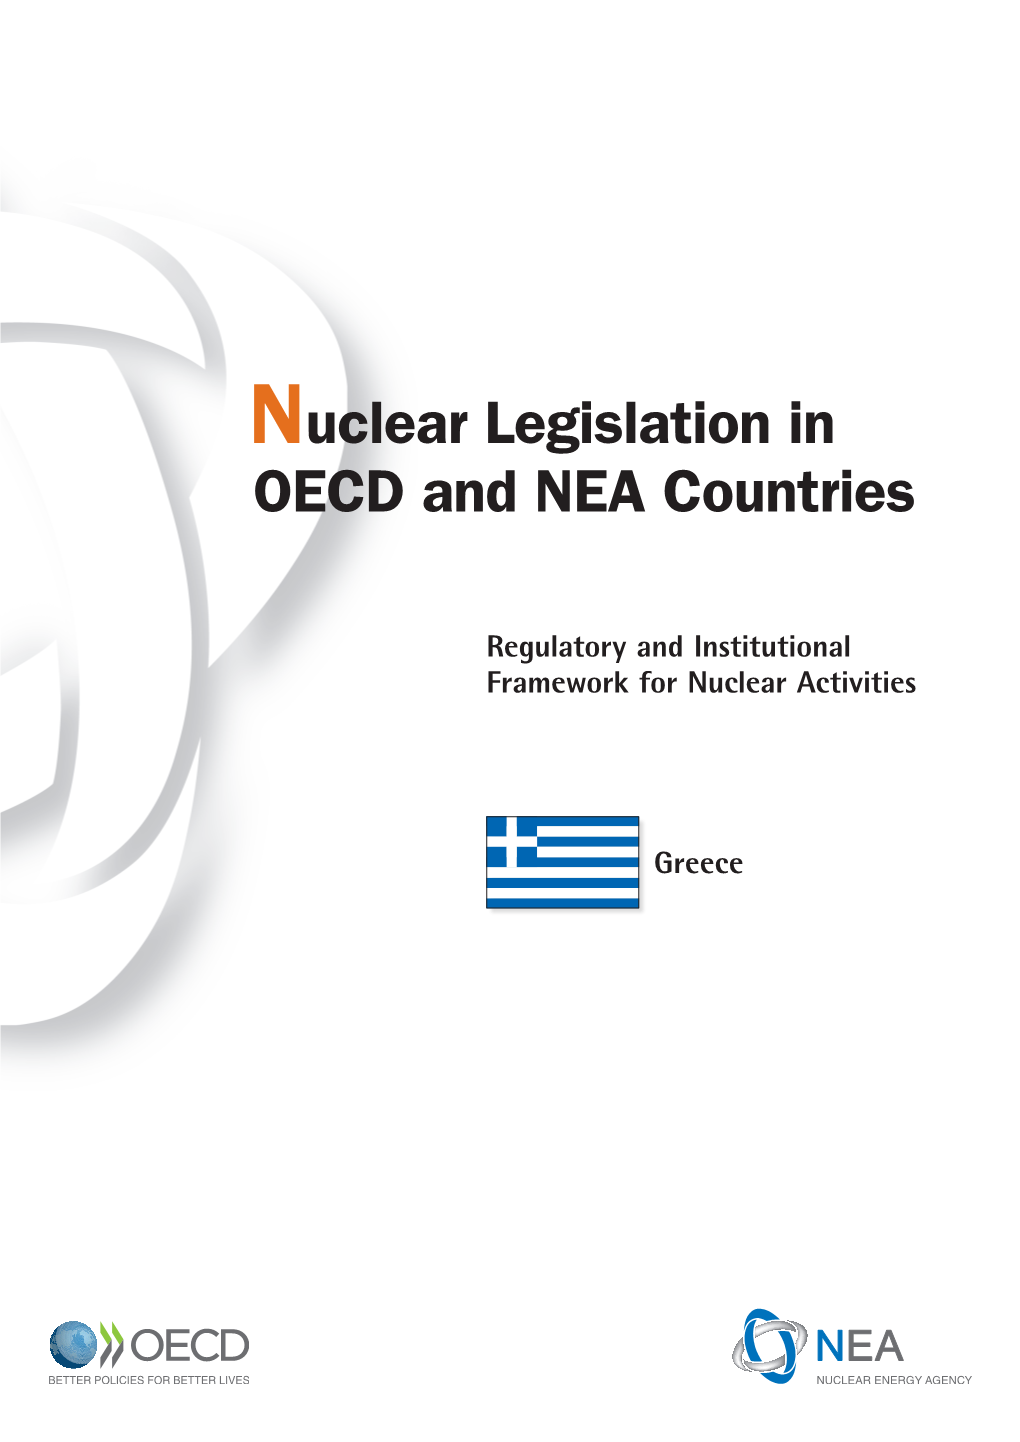 Nuclear Legislation in OECD and NEA Countries © OECD 2016